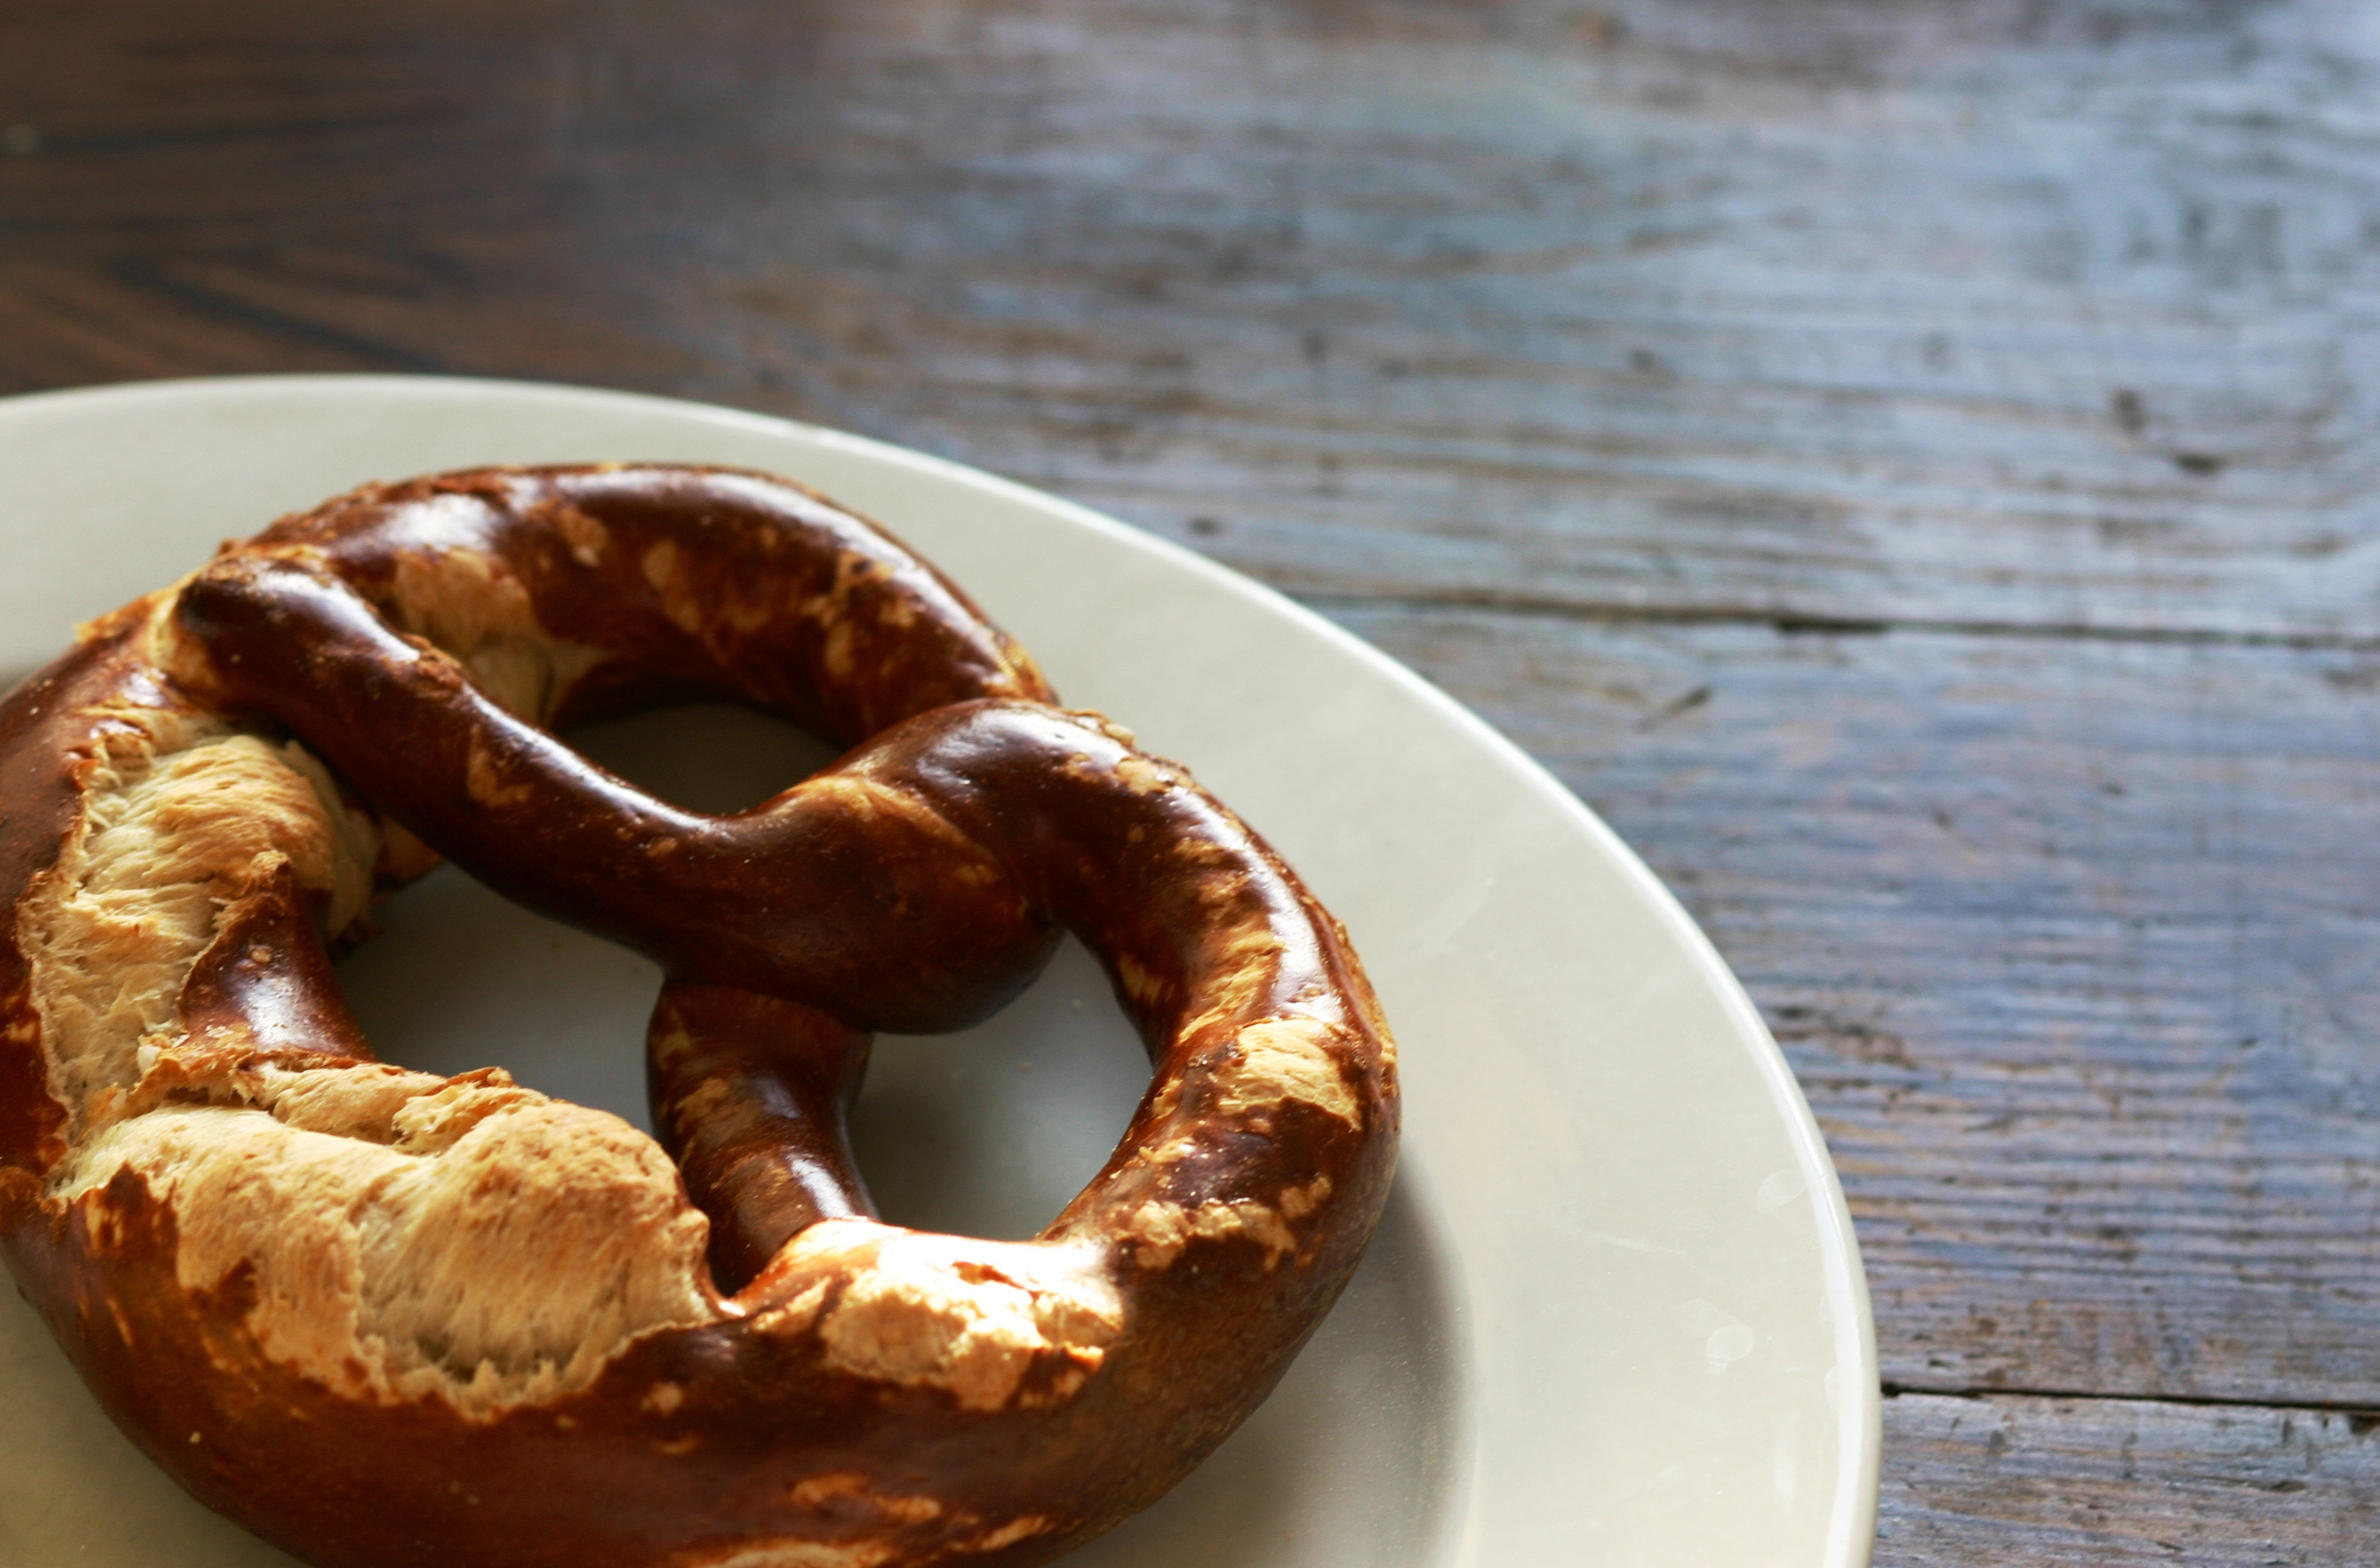 A freshly baked pretzel on a white plate with a wooden table background